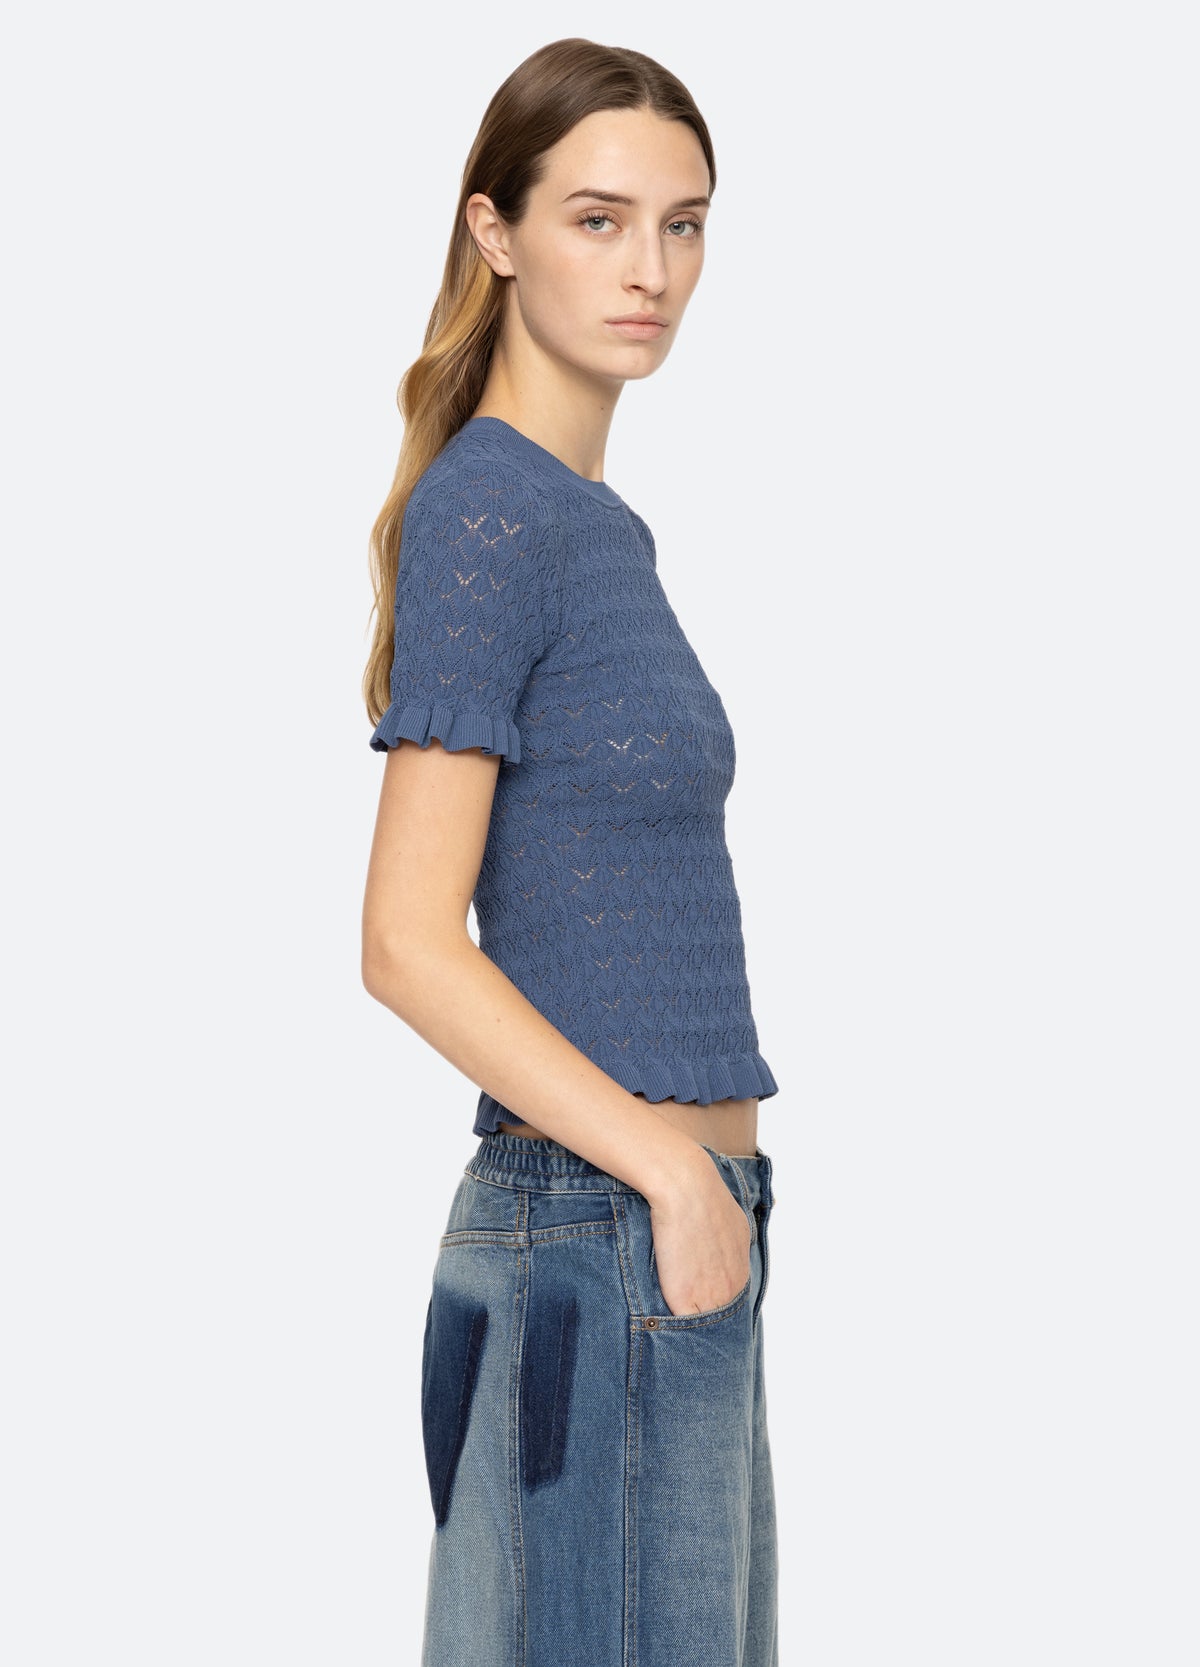 blue-rue s/s sweater-side view - 17